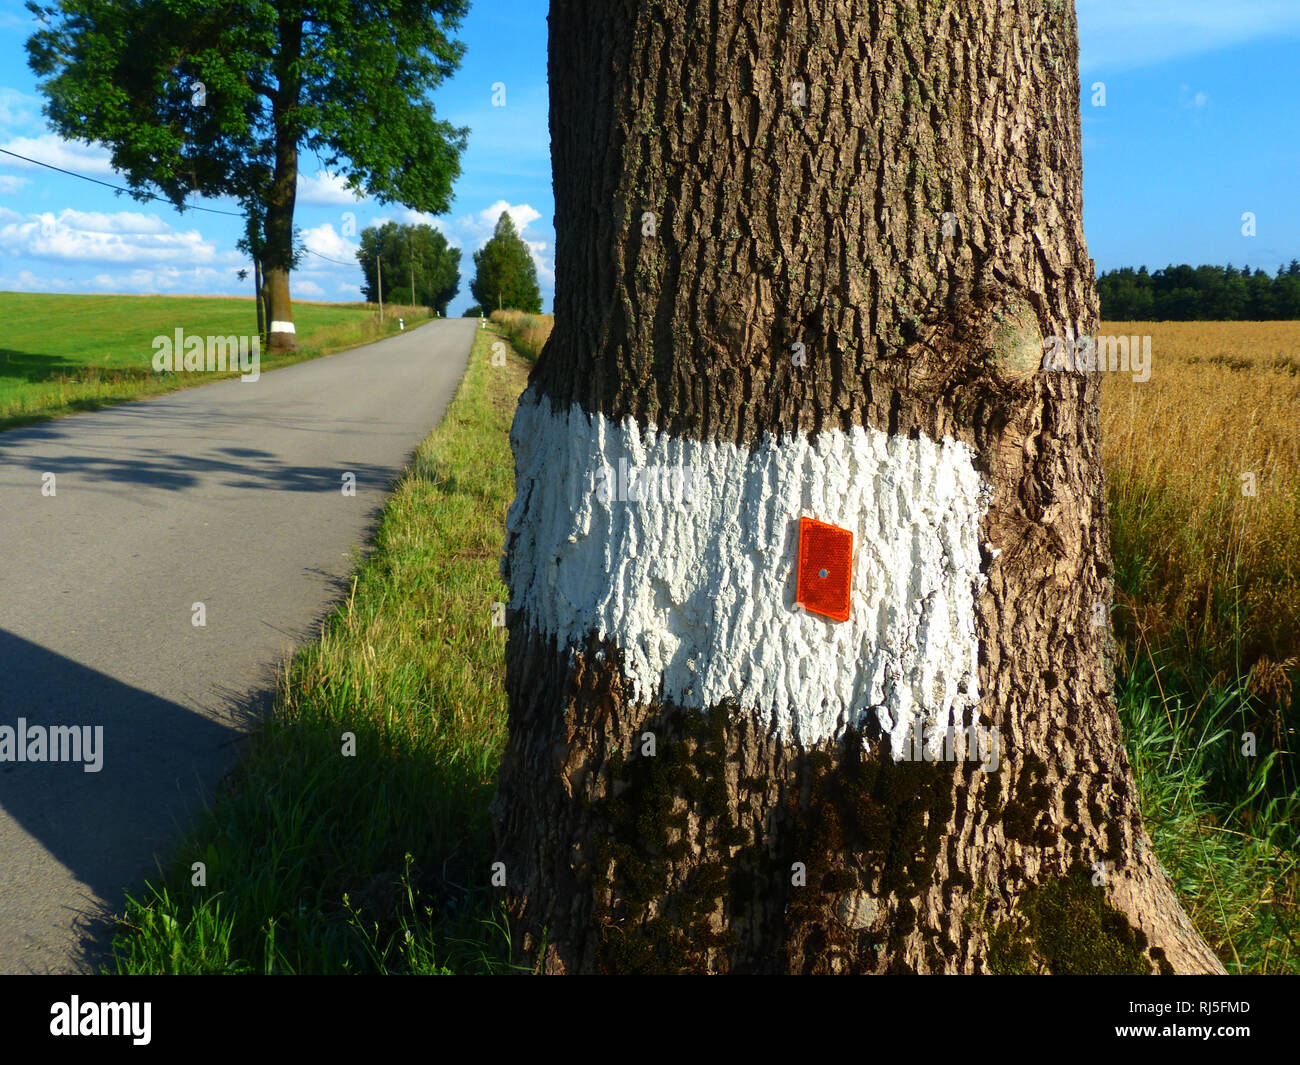 Large linden tree marked with white paint and reflecting glass for driving safety Stock Photo